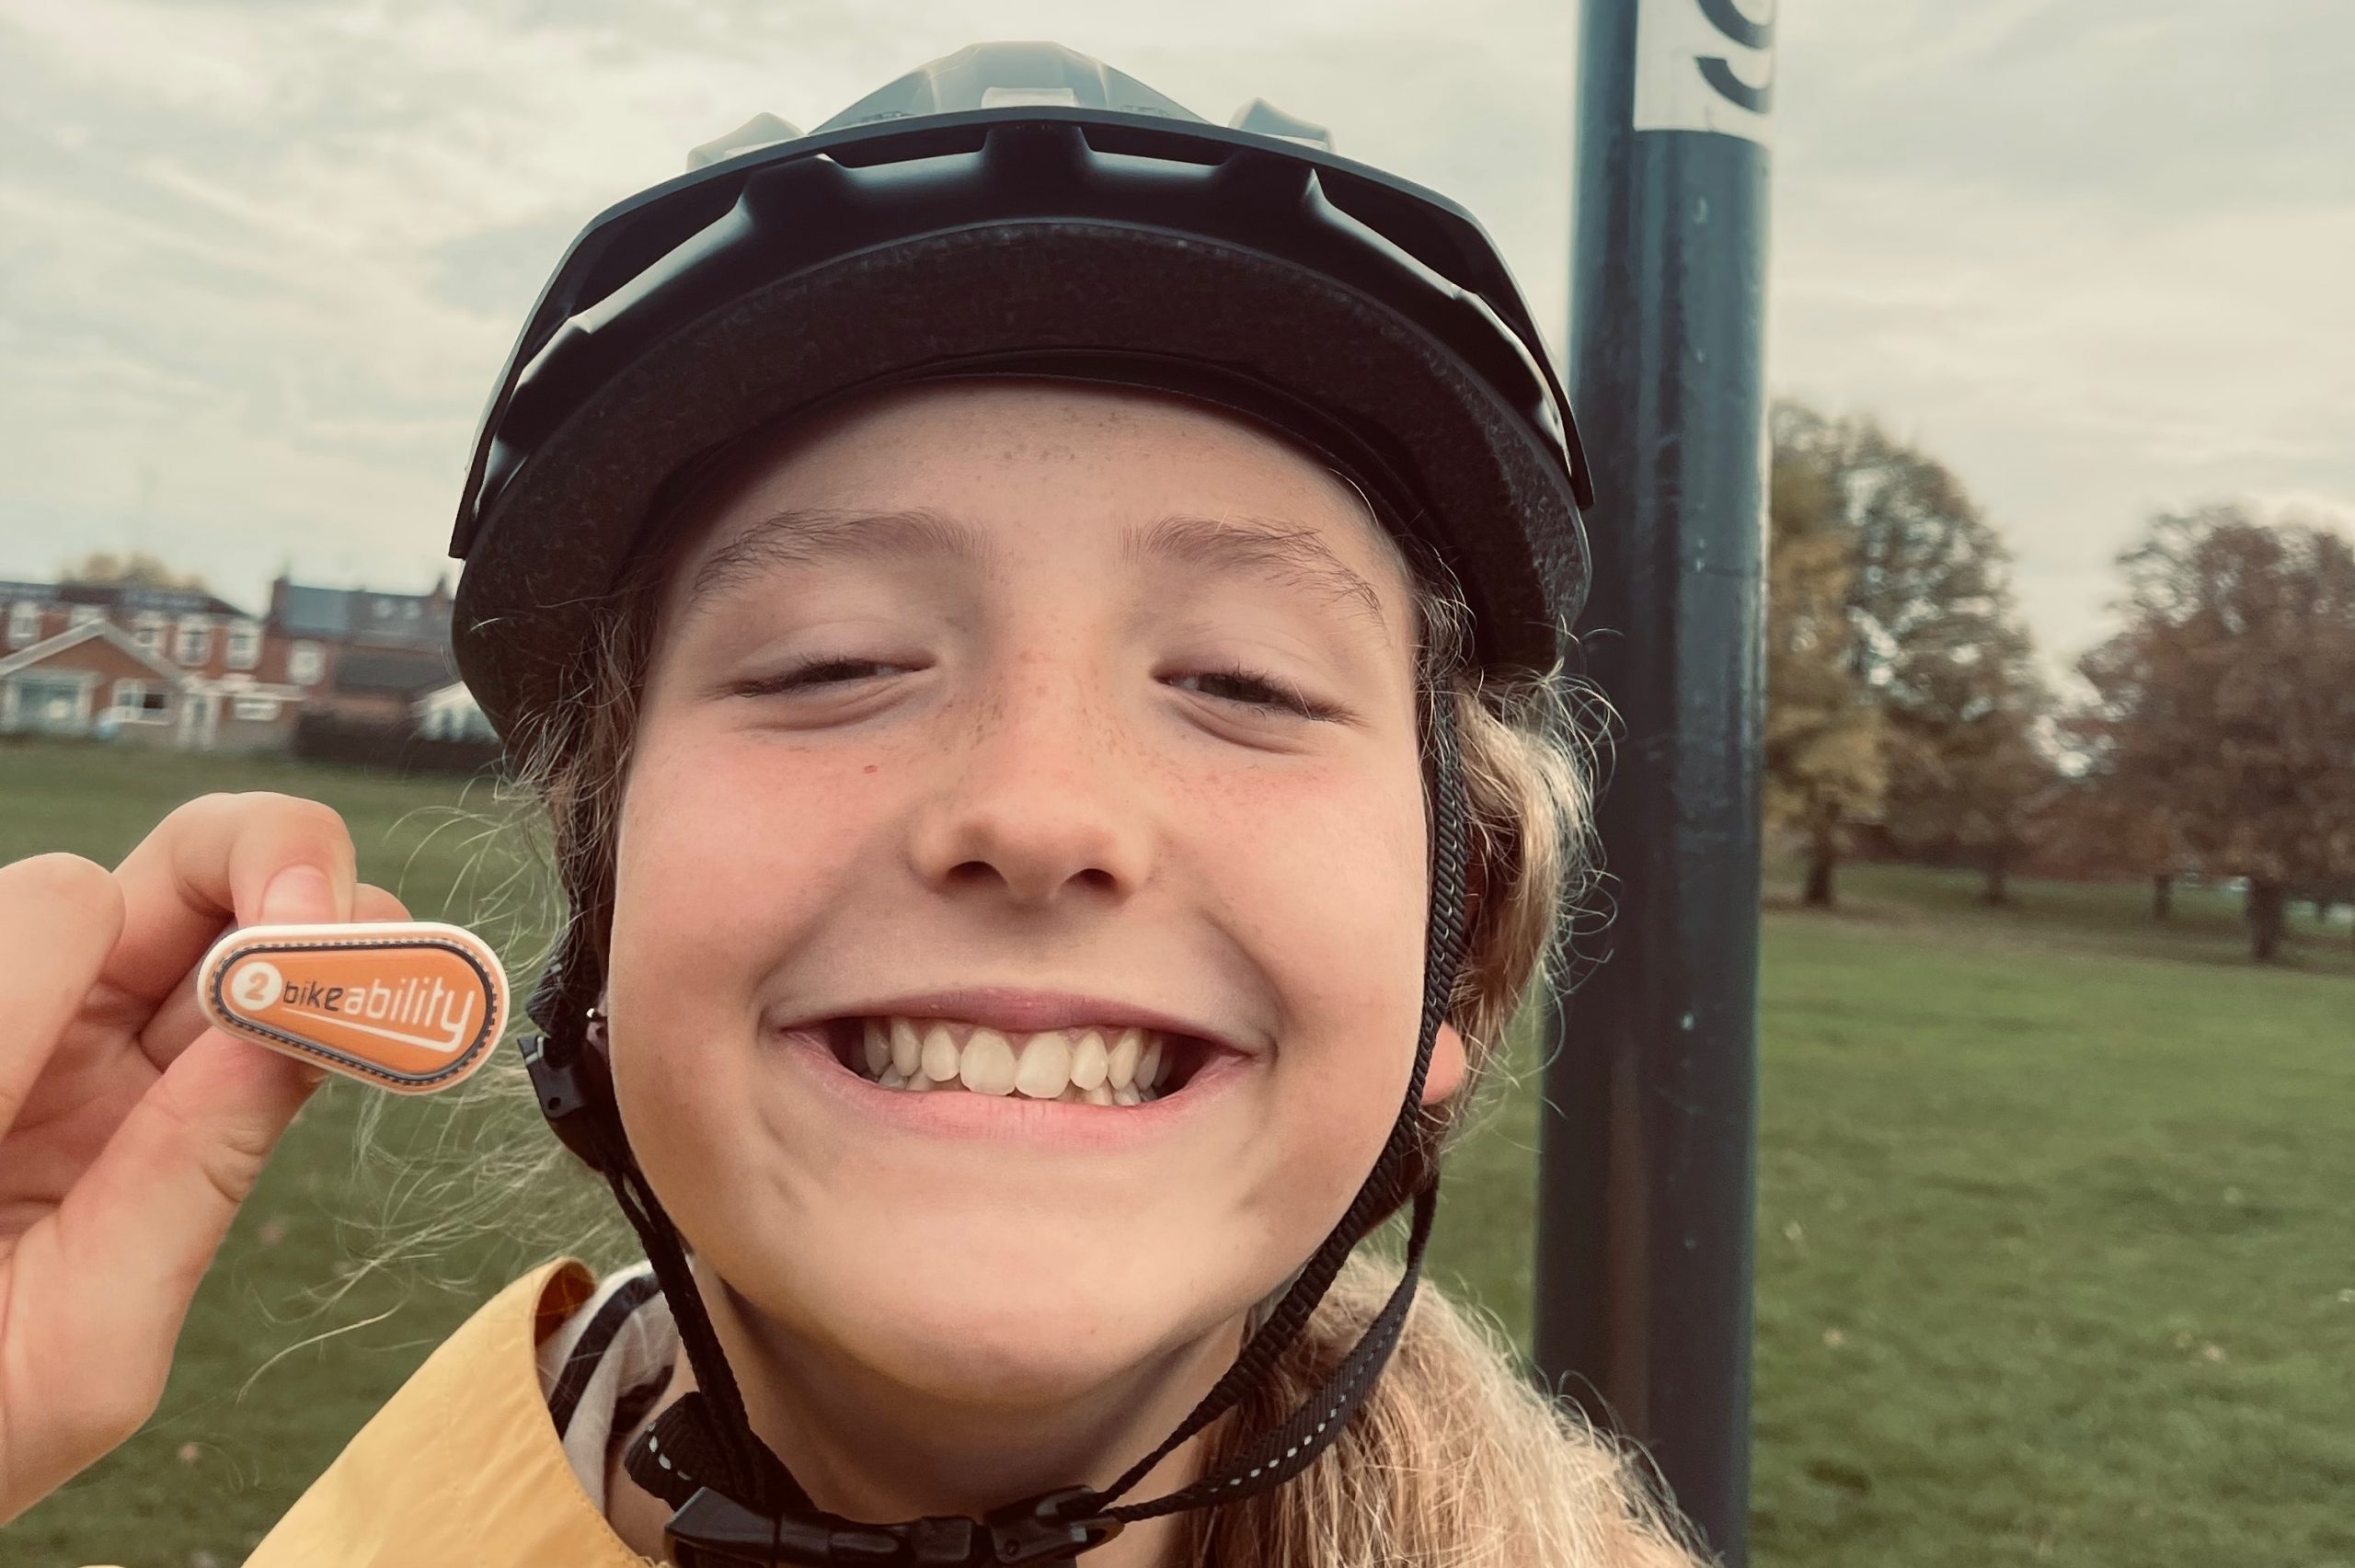 Lilly smiling with her Bikeability badge